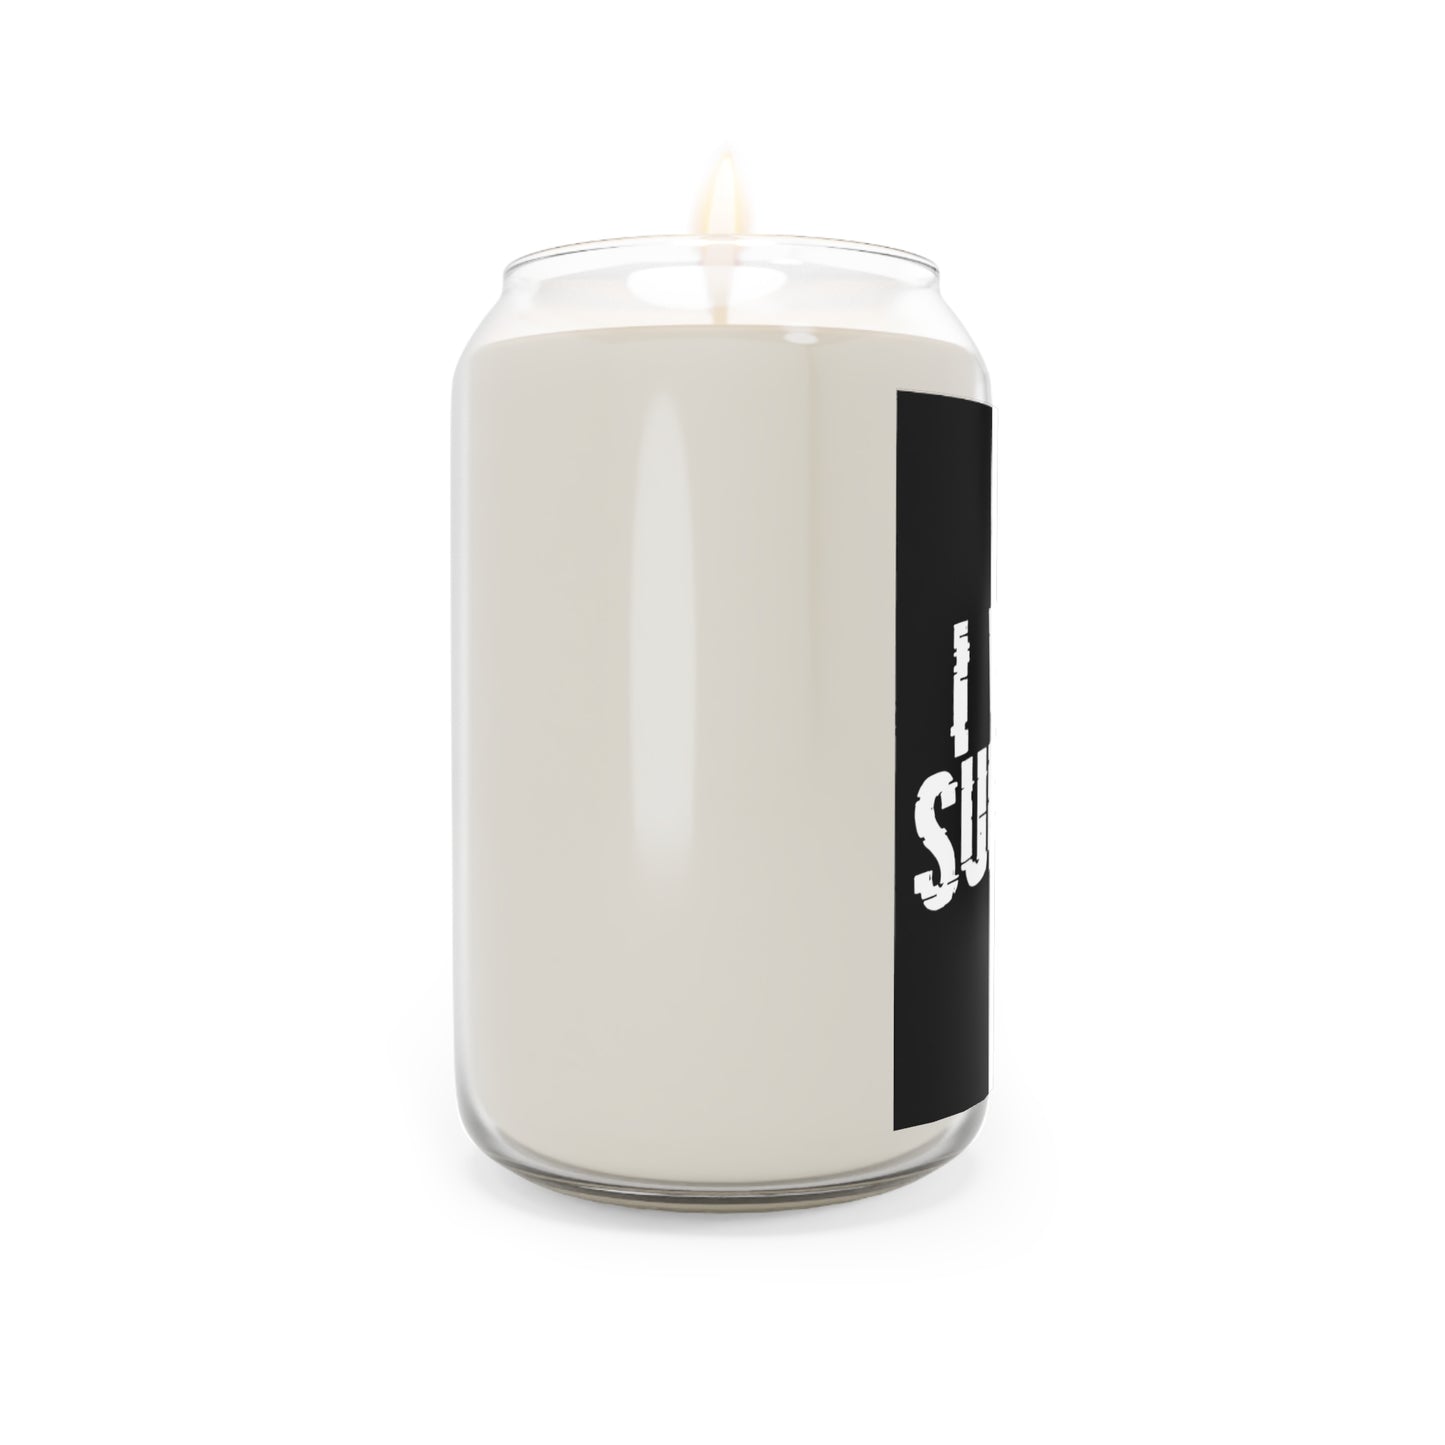 I WILL SURVIVE Candle